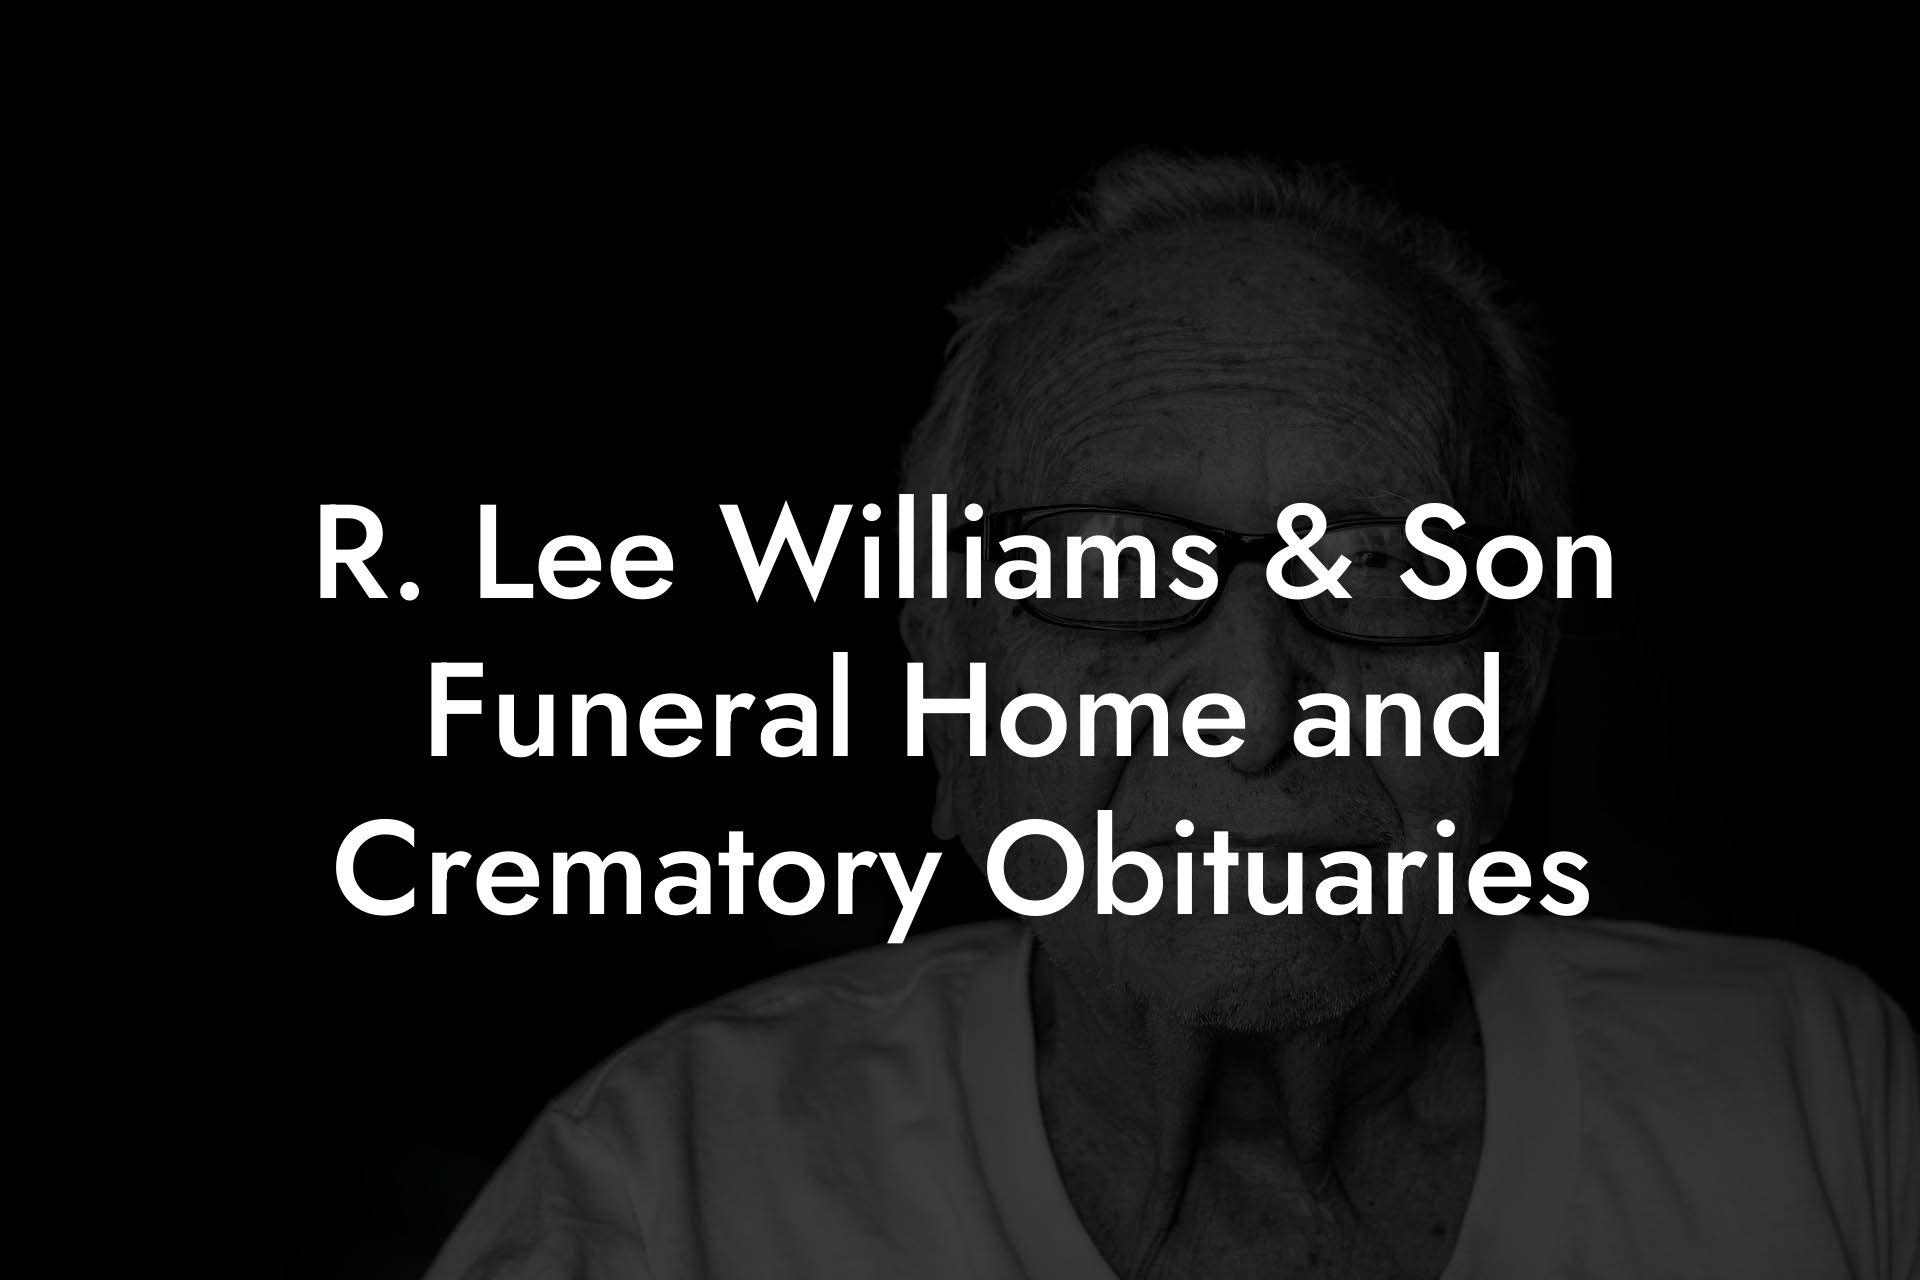 R. Lee Williams & Son Funeral Home and Crematory Obituaries